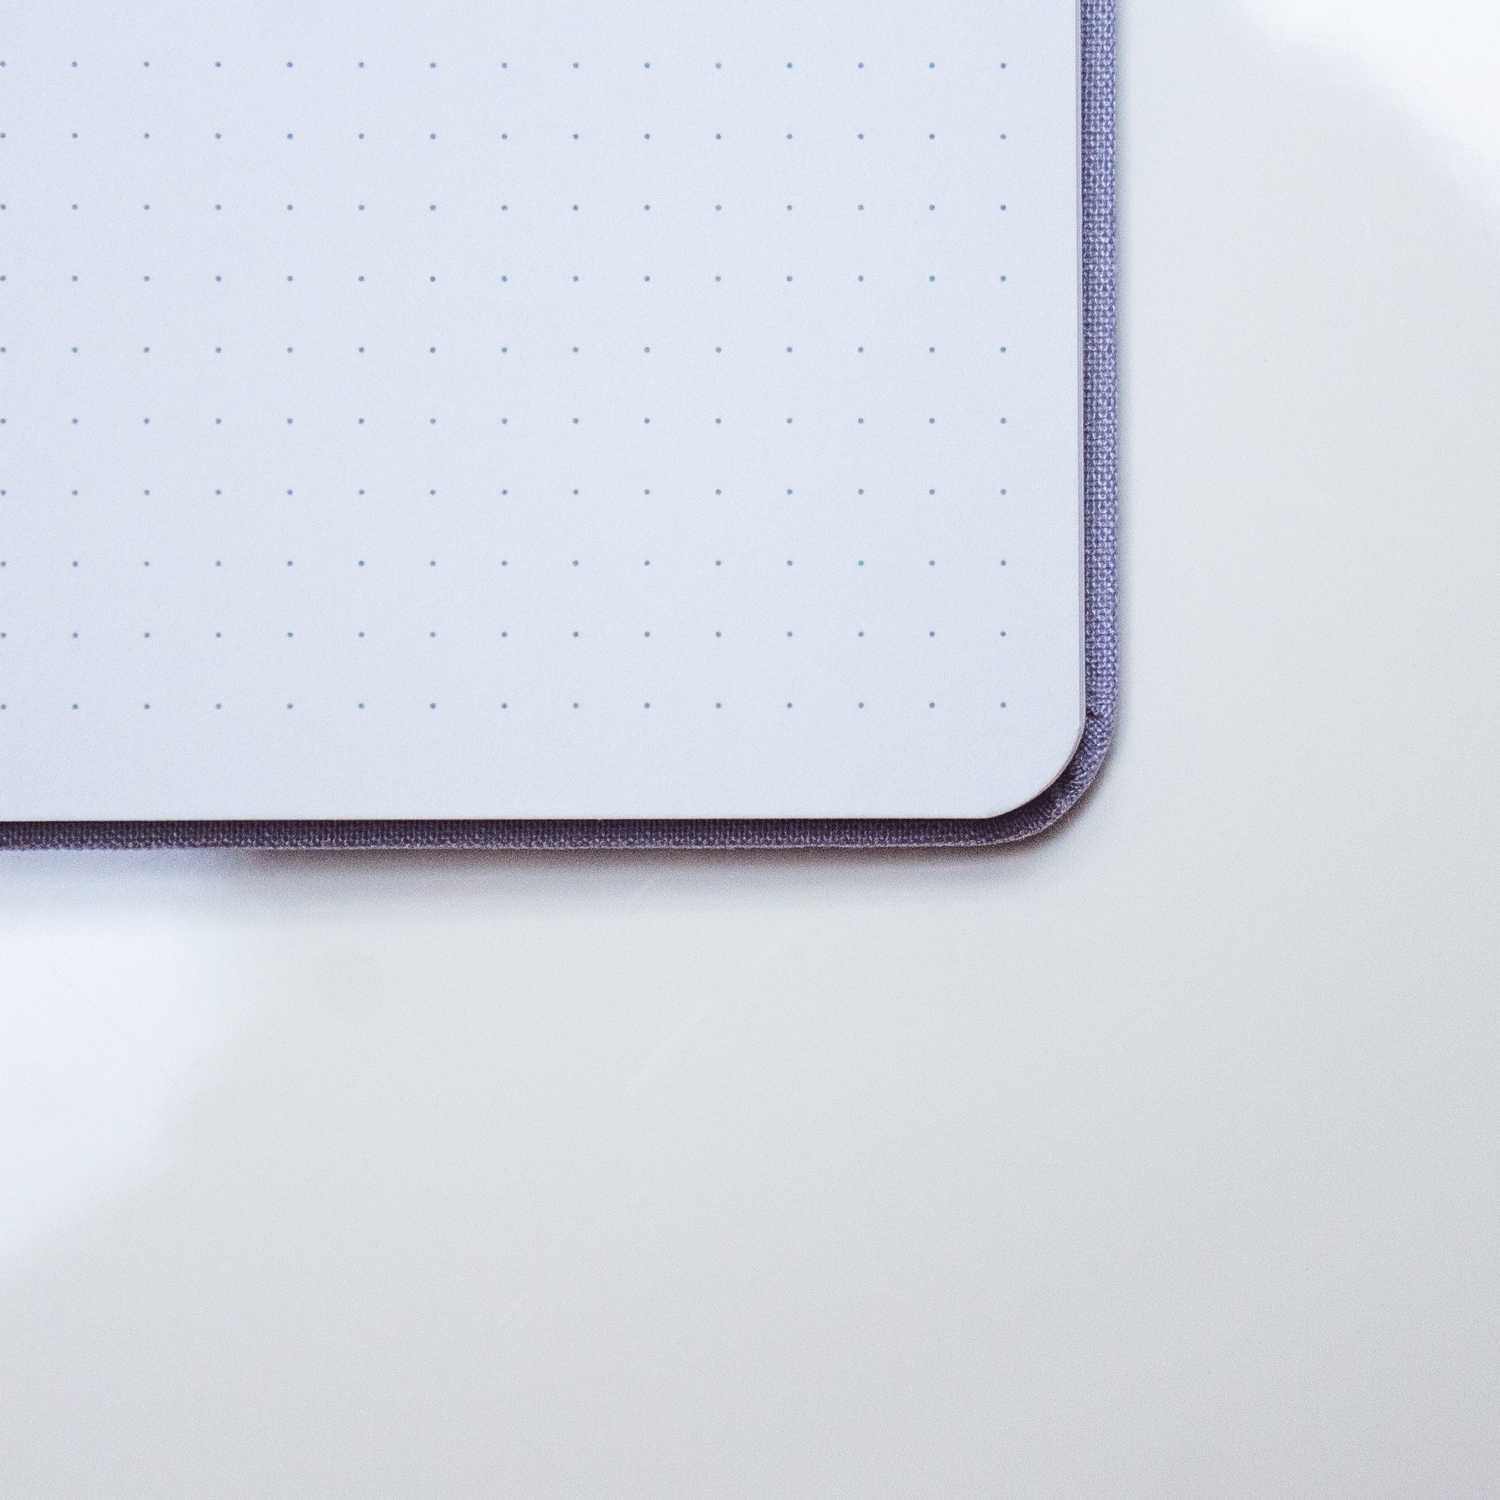 A close-up of the opened Cloud 9 dot grid journal, showing the white dot grid pages.